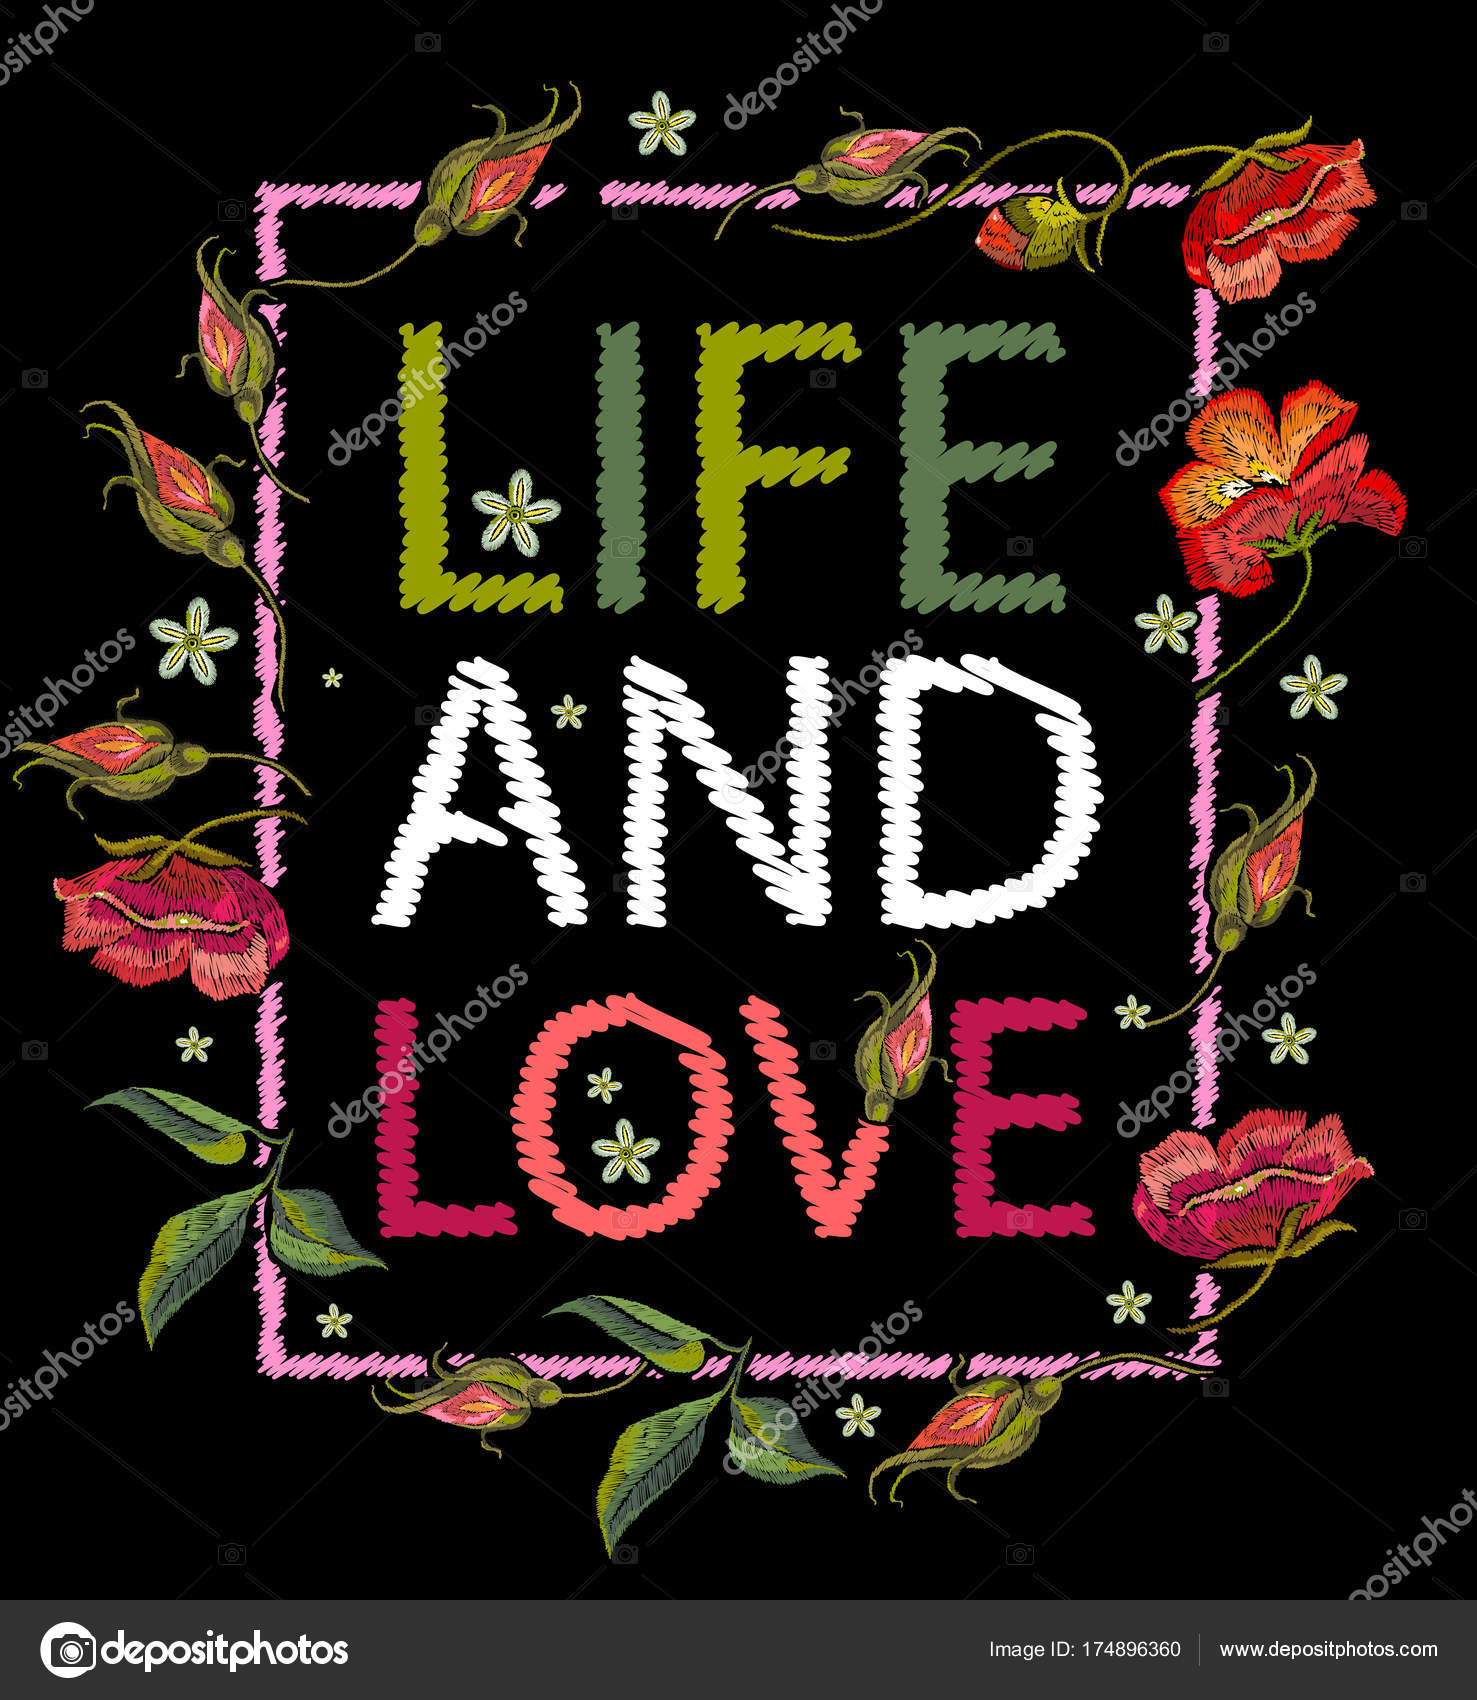 Embroidery poppies flowers t-shirt design. Life and love slogan